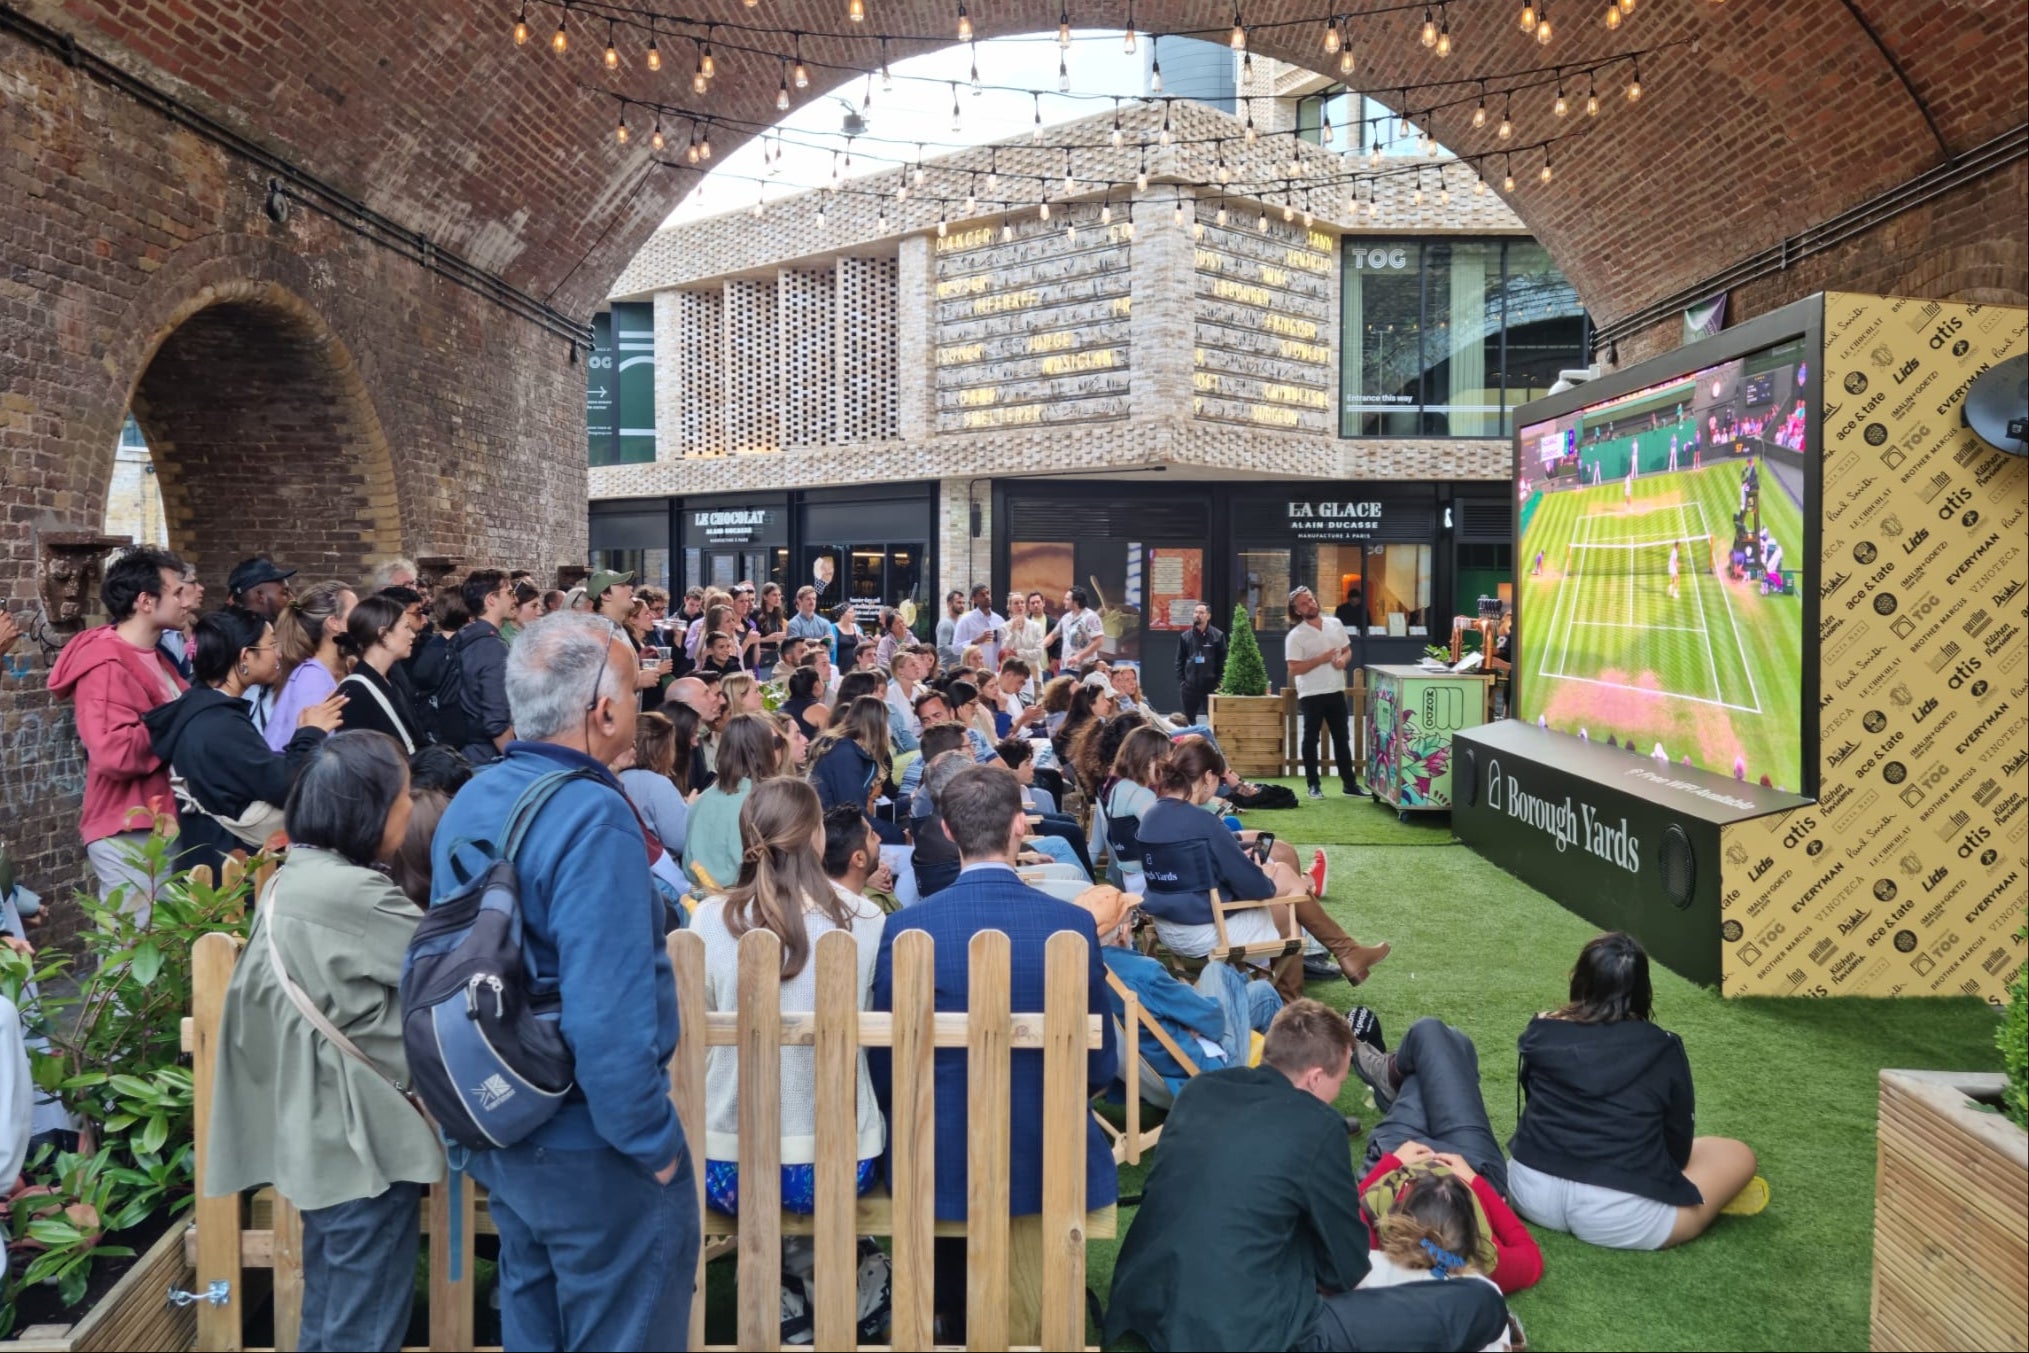 A Wimbledon-themed big screen has all the action from the courts